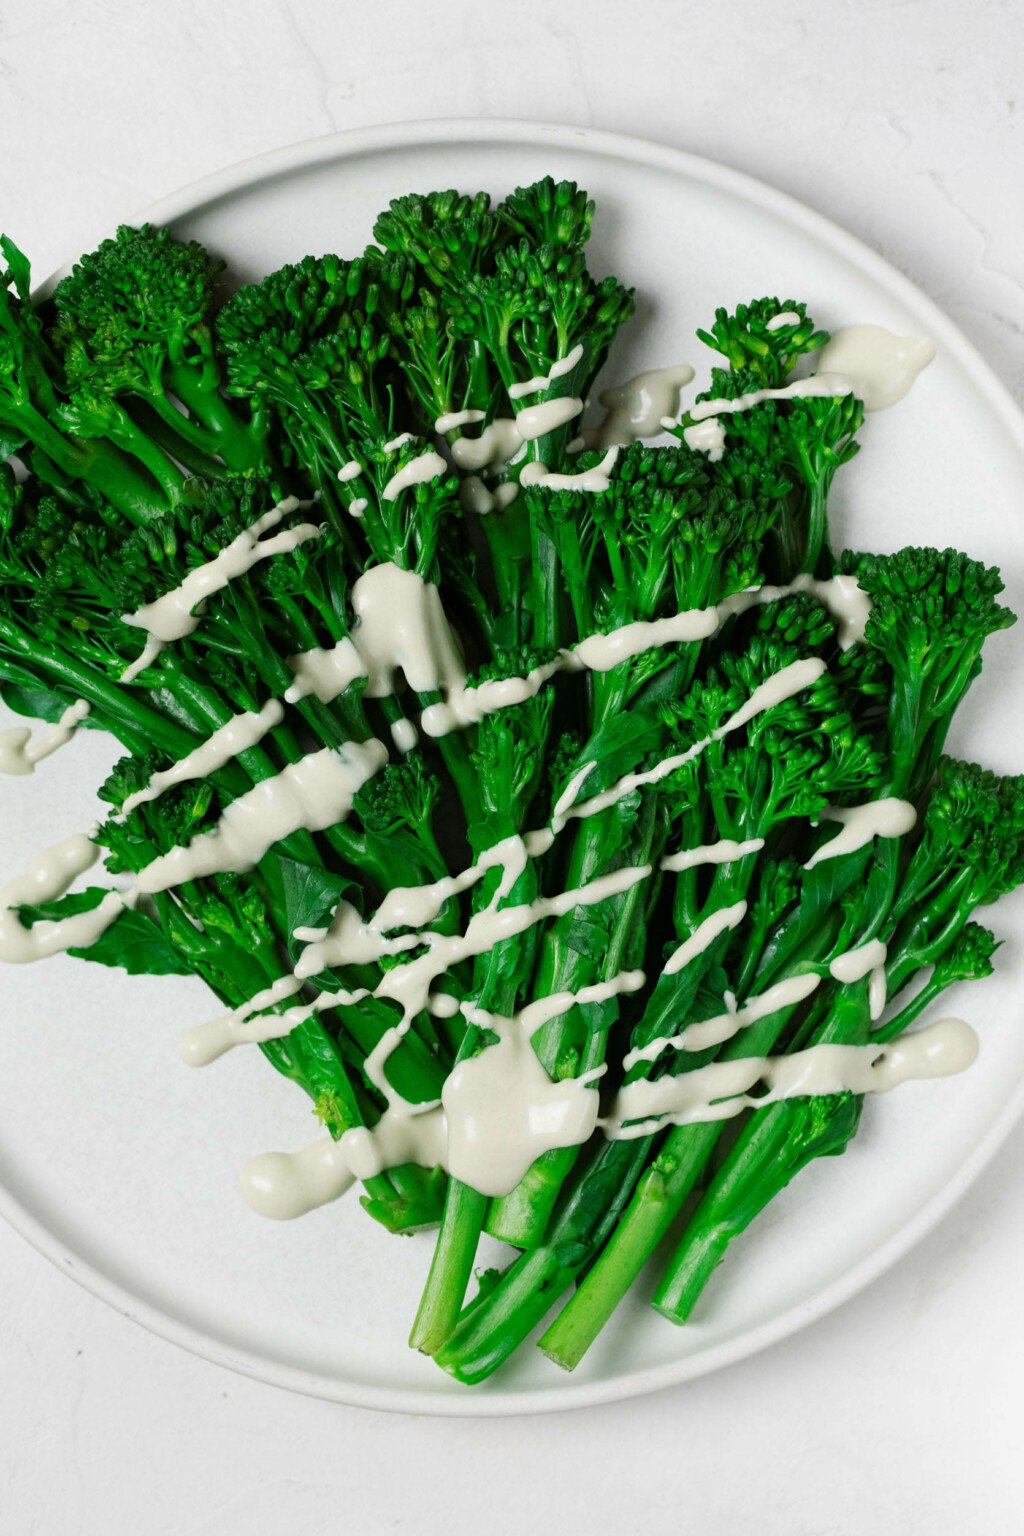 An overhead image of bright green, steamed broccolini resting on a white, round plate. The broccolini is drizzled with a creamy white tahini dressing.